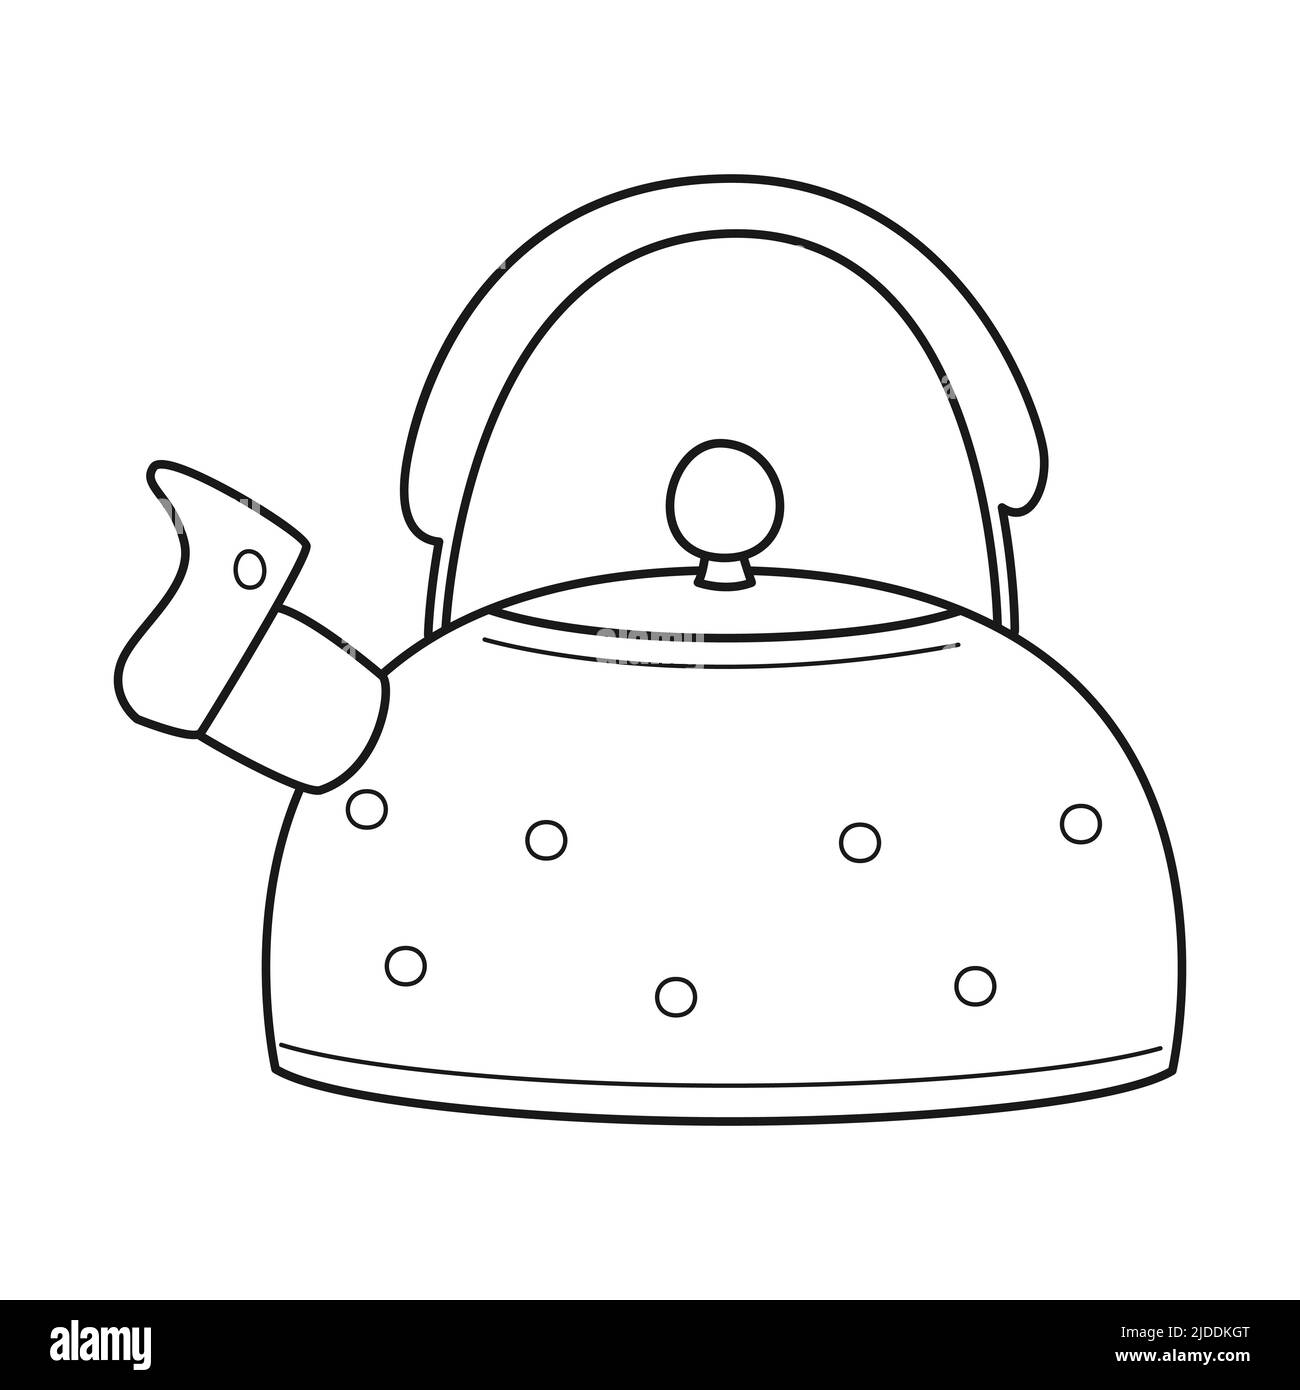 Doodle Red polka dot teapot with lid and whistle. Kitchen equipment, utensils for camping, picnic, cooking on gas or fire. Outline black and white vec Stock Vector